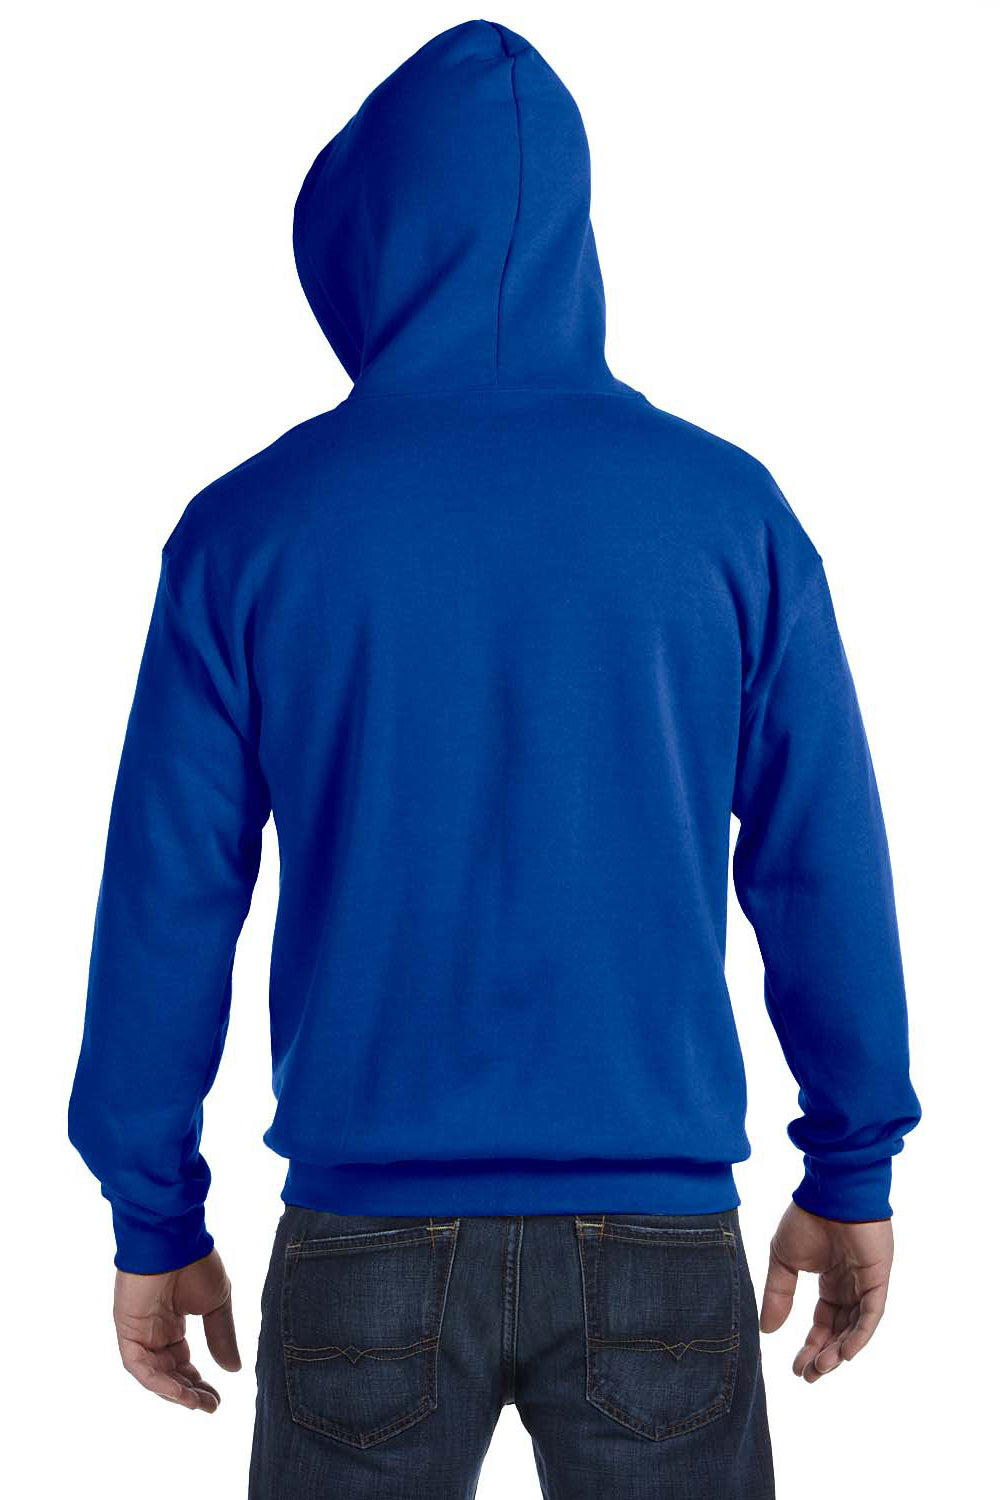 First Row Graphic Hoodie (Men) Large / Royal Blue